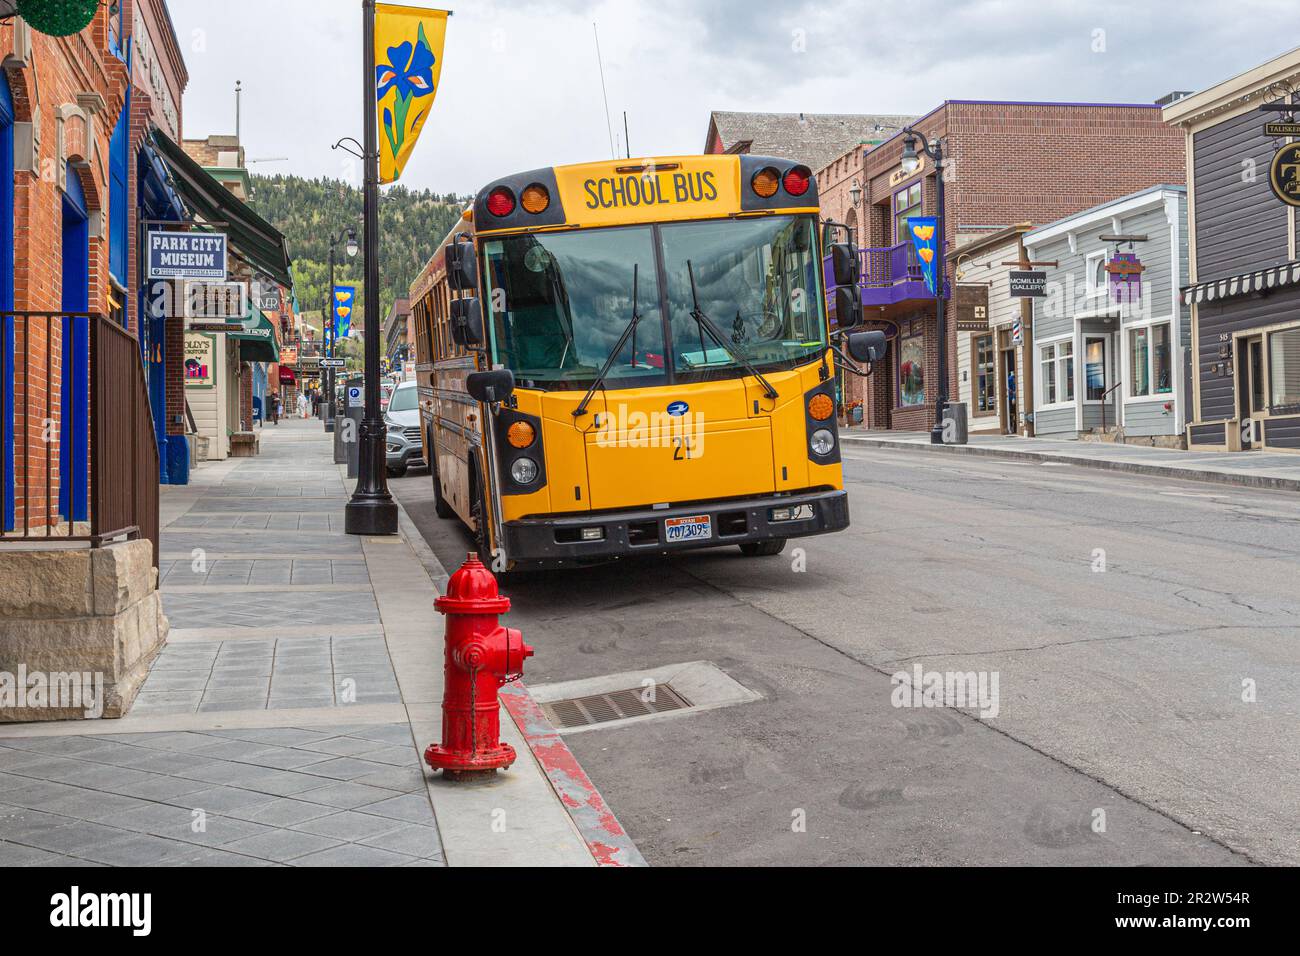 An iconic yellow American school bus parked in front of a red fire hydrant and against the backdrop of Park City in Summit County, Utah, USA Stock Photo